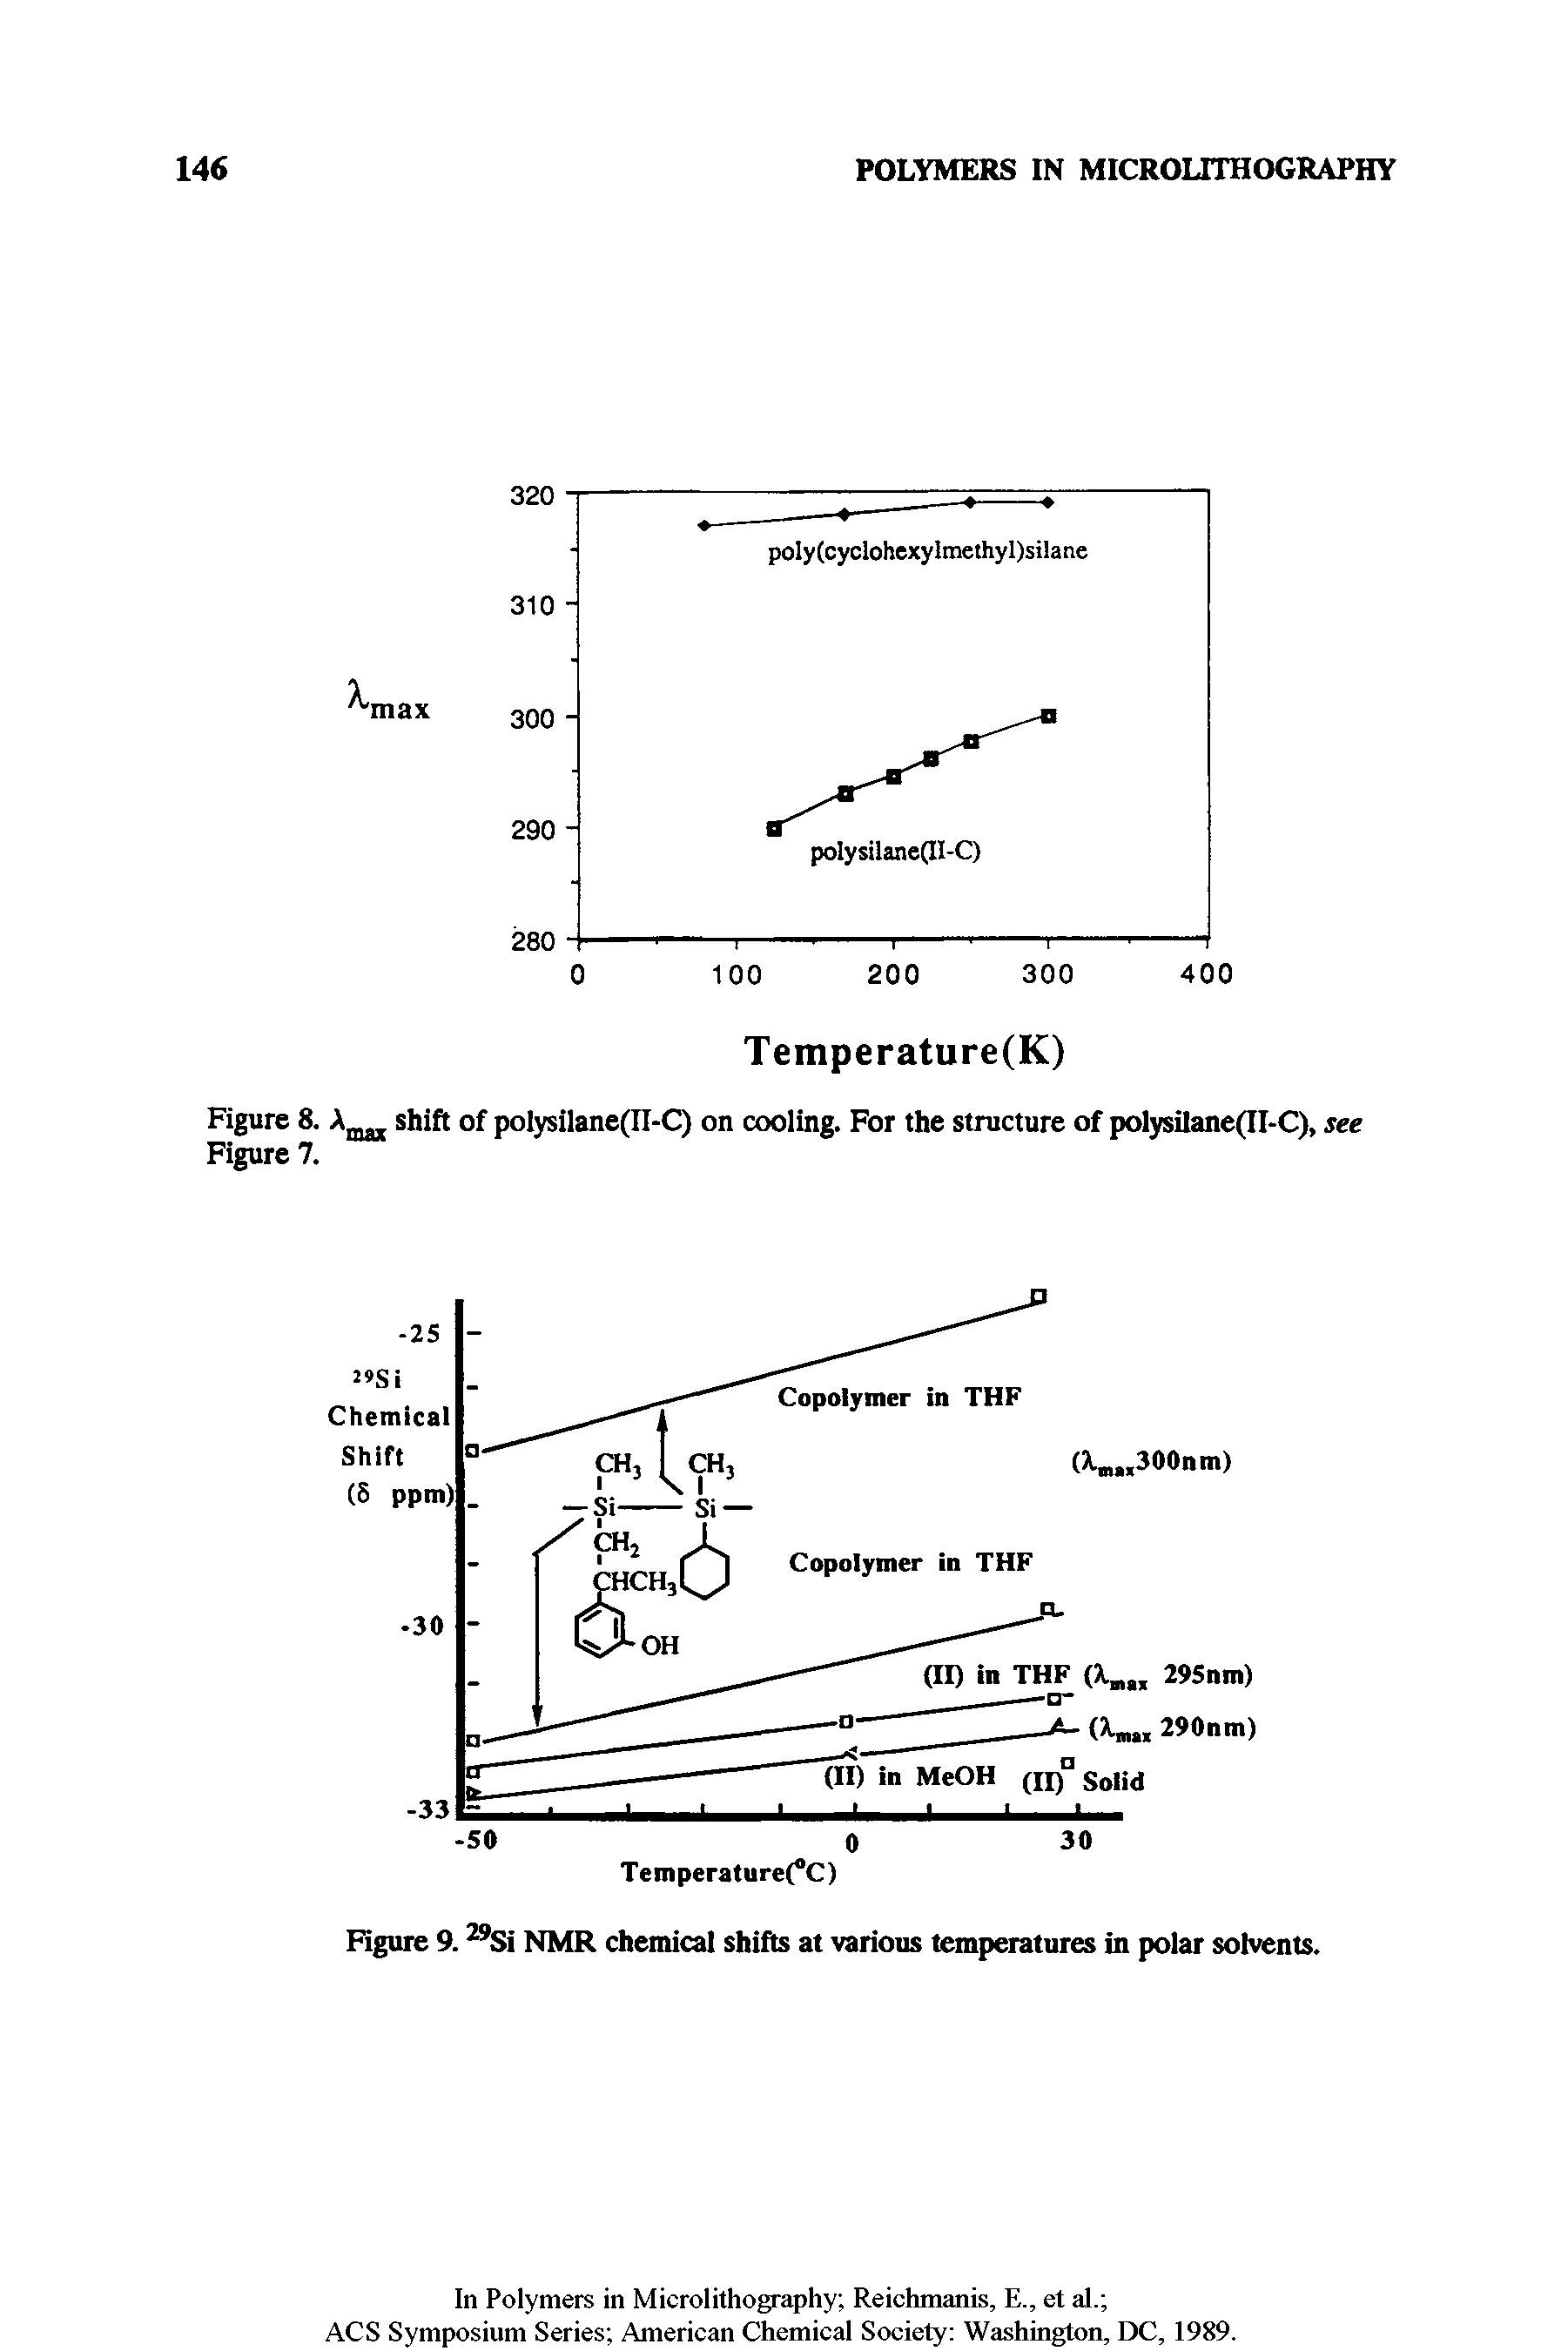 Figure 9.29Si NMR chemical shifts at various temperatures in polar solvents.